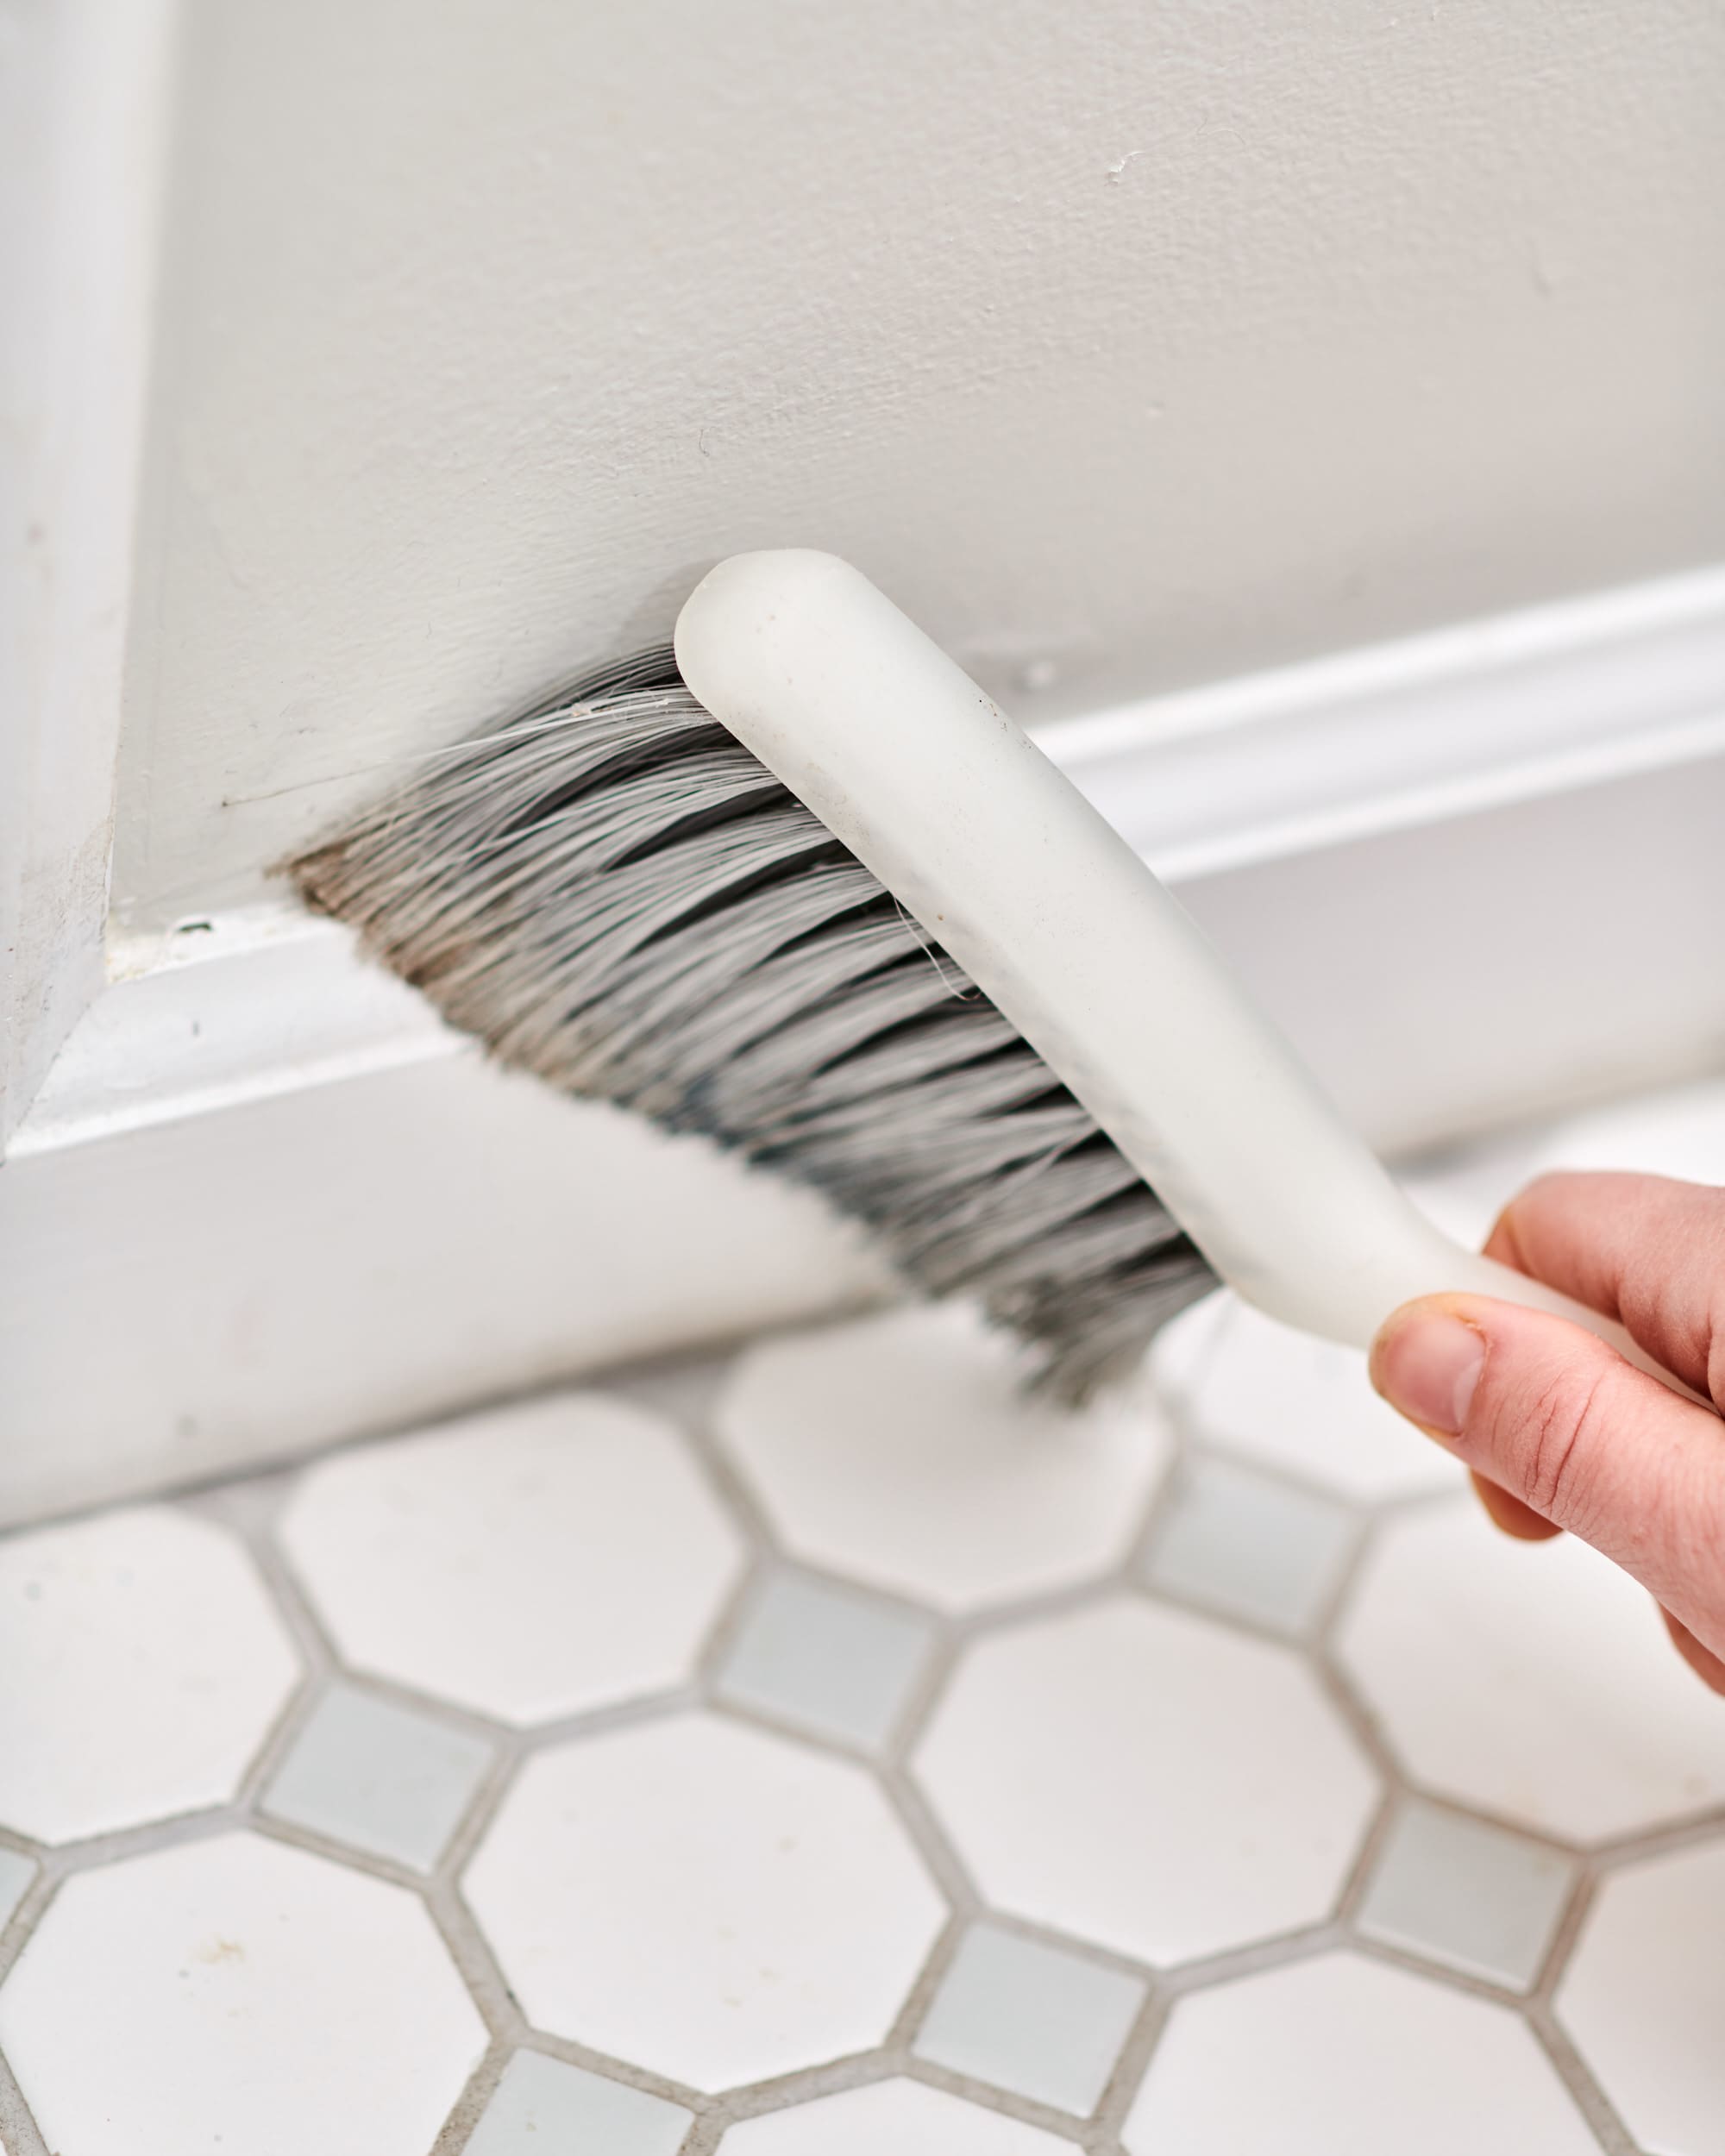 https://cdn.apartmenttherapy.info/image/upload/v1585255119/at/art/photo/2020-04/how-to-clean-baseboards/6-Easy--and-Some-Weird--Ways-to-Clean-Baseboards-dust.jpg